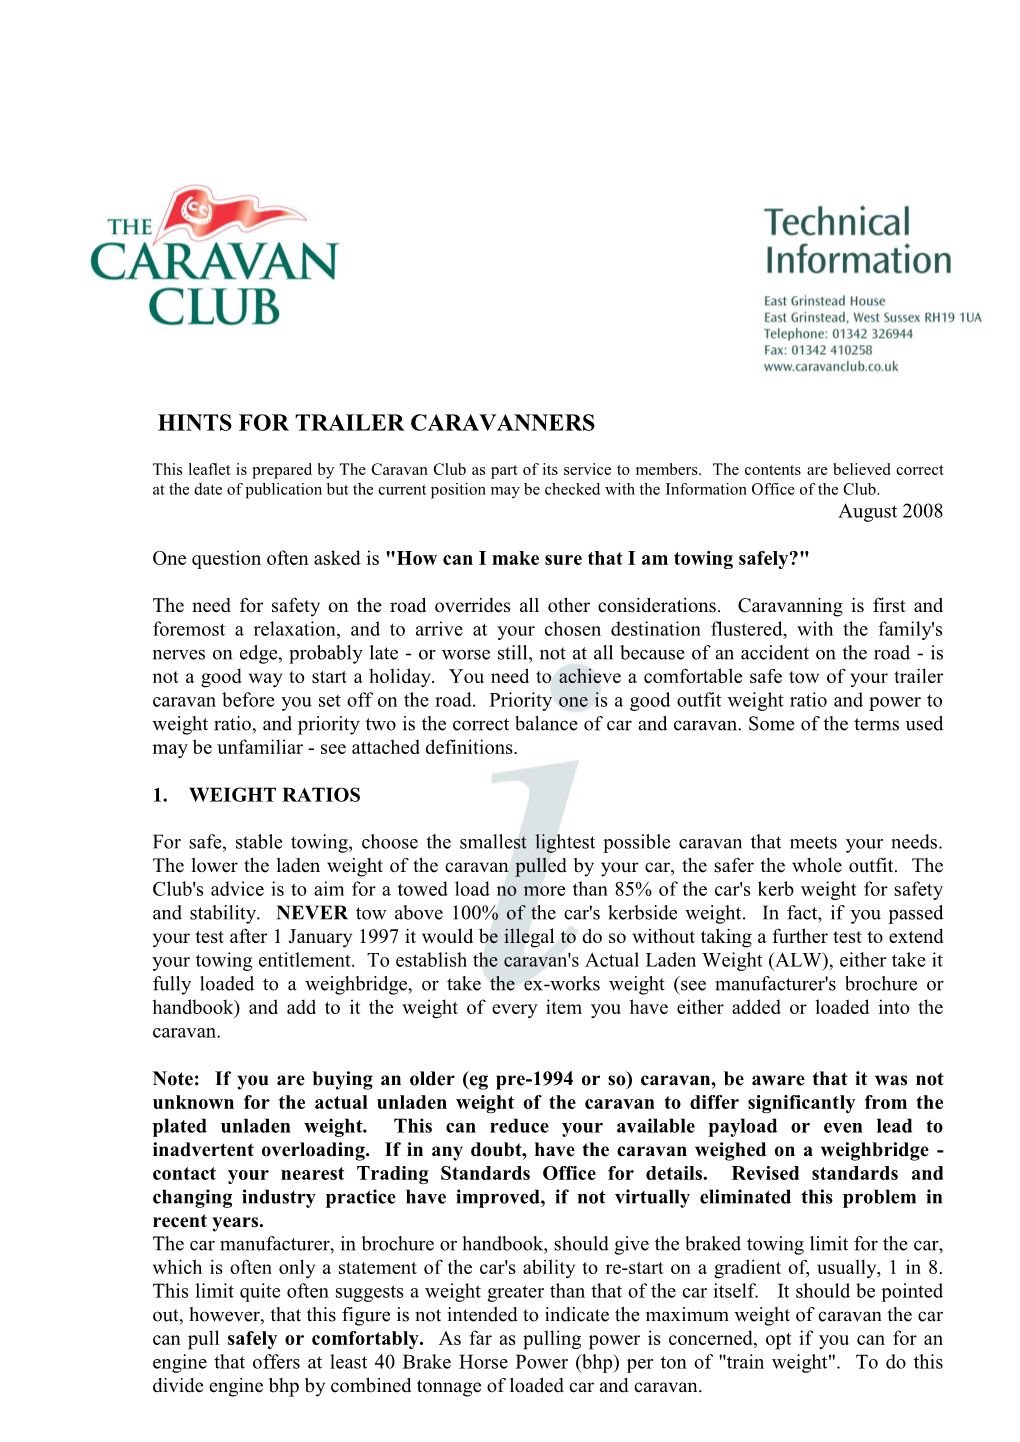 Hints for Trailer Caravanners